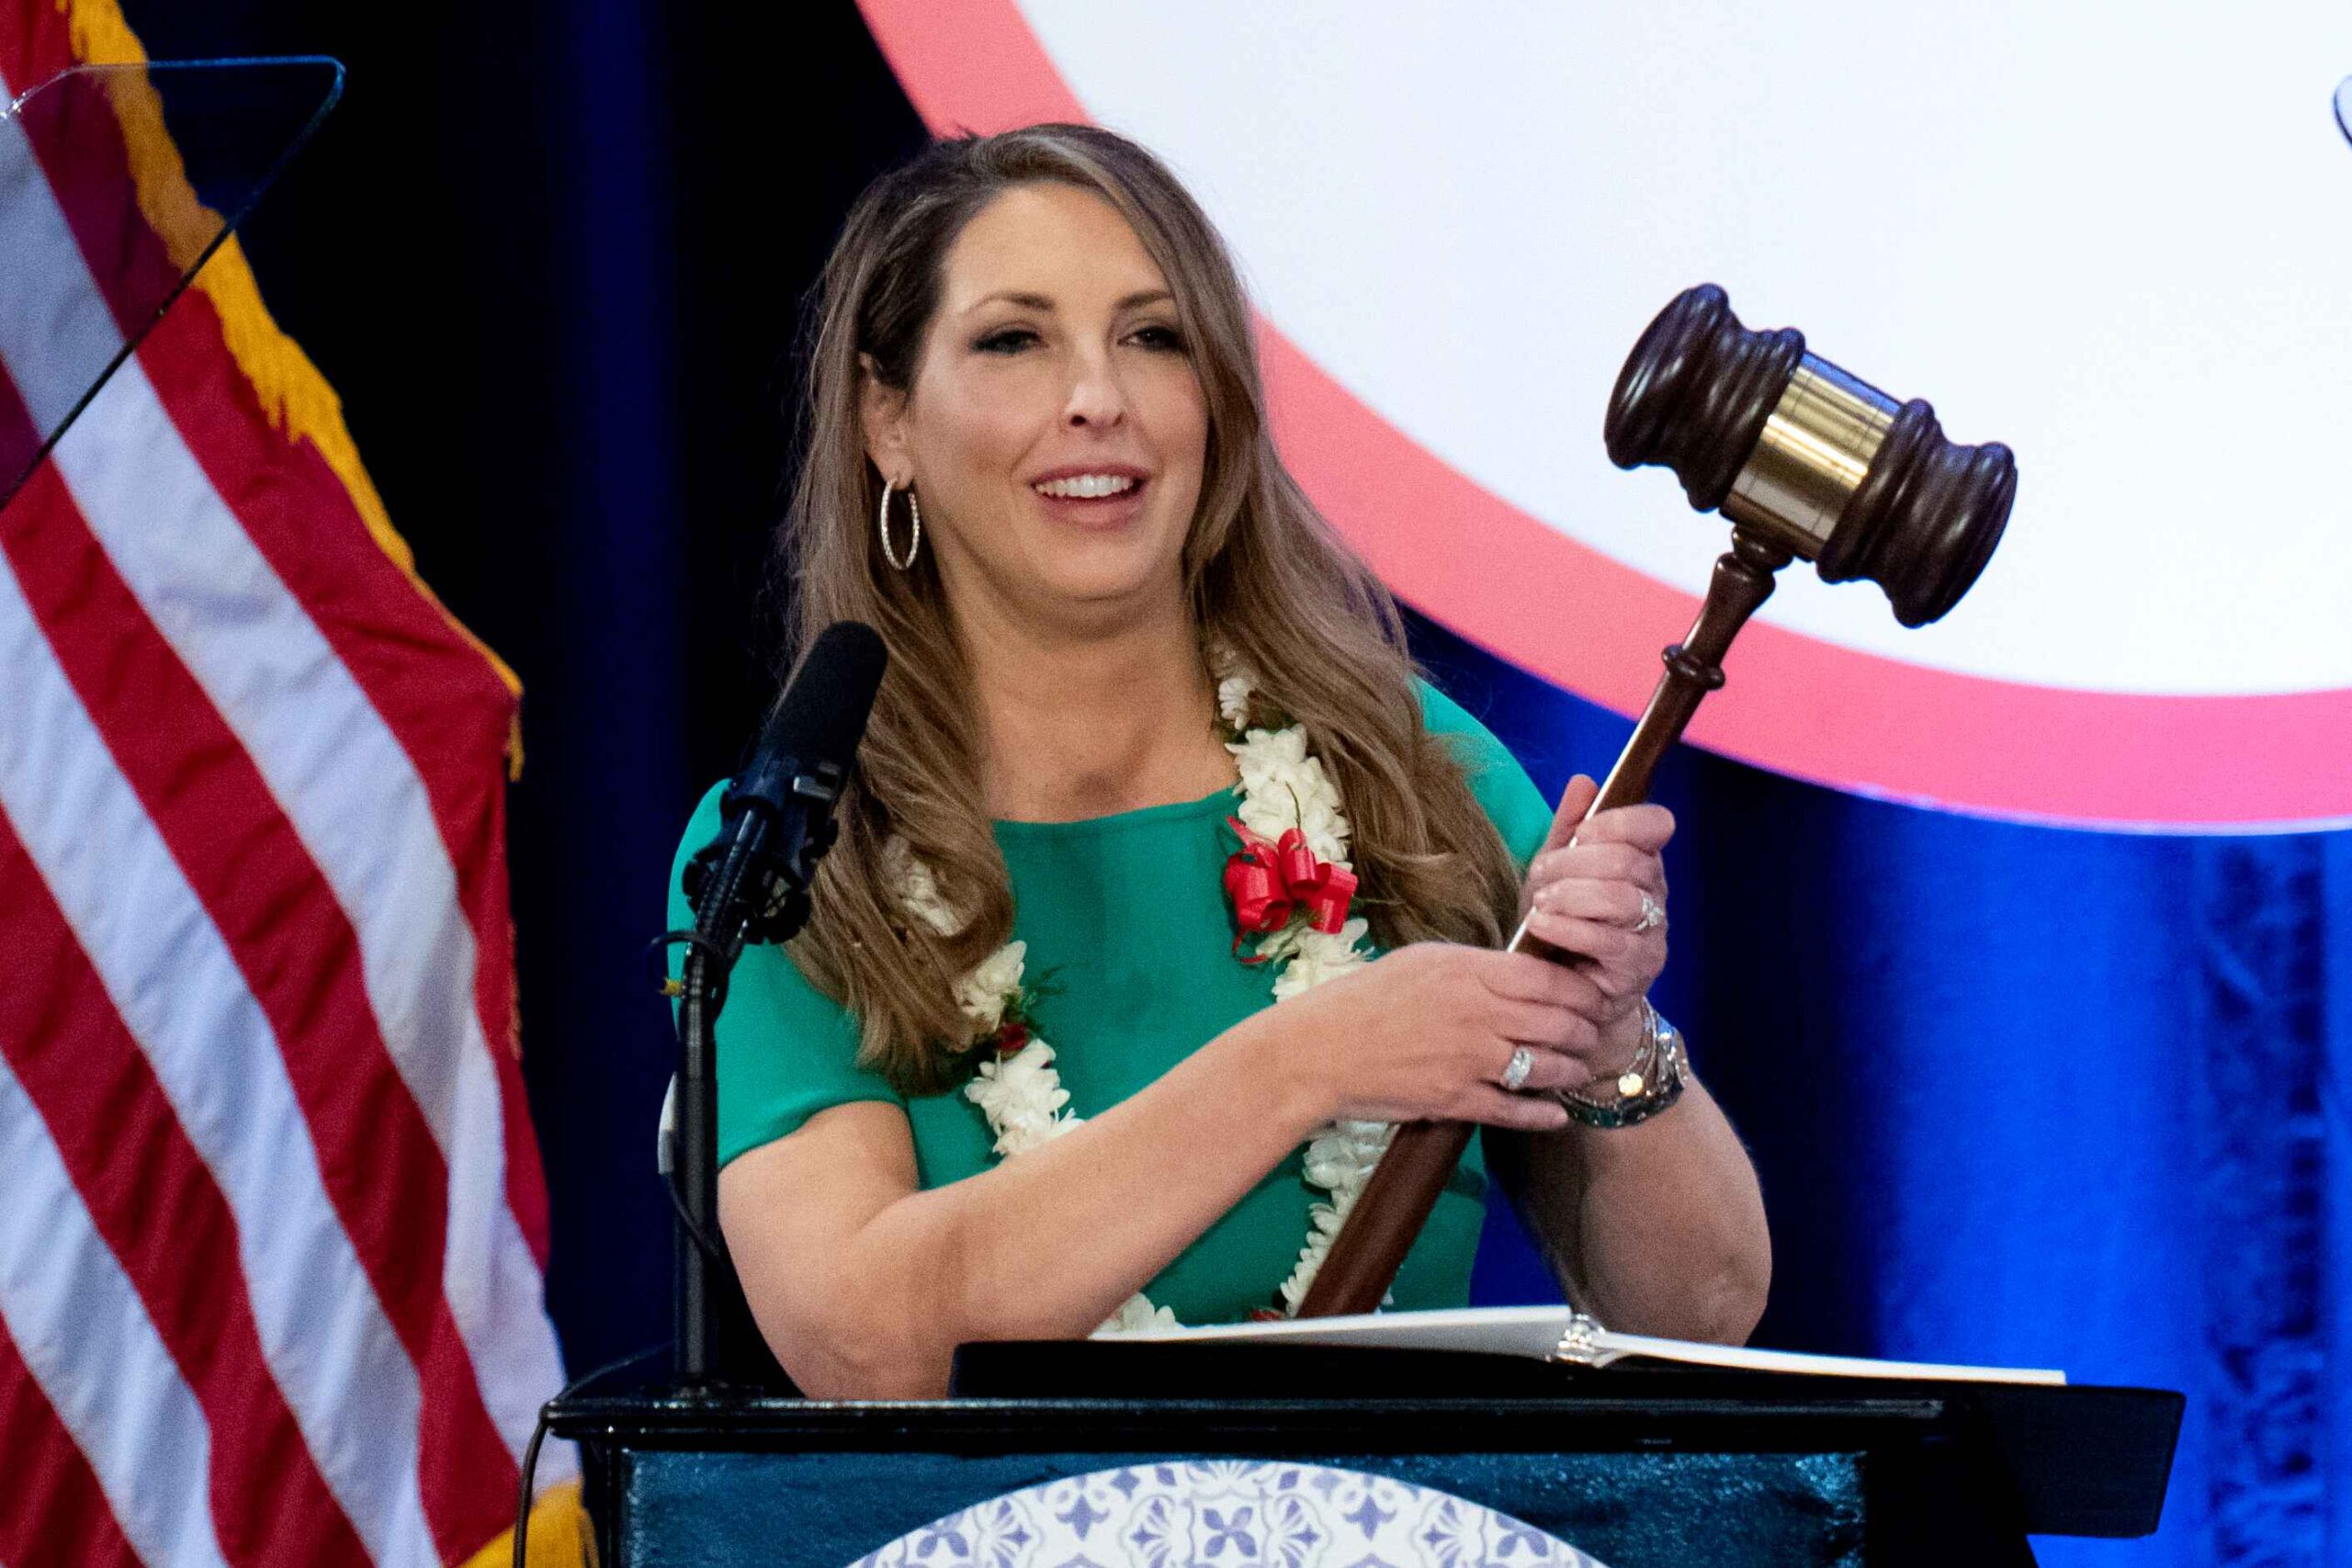 Republican National Committee (RNC) Chairwoman Ronna McDaniel will reportedly step down after the South Carolina presidential primary on February 24.